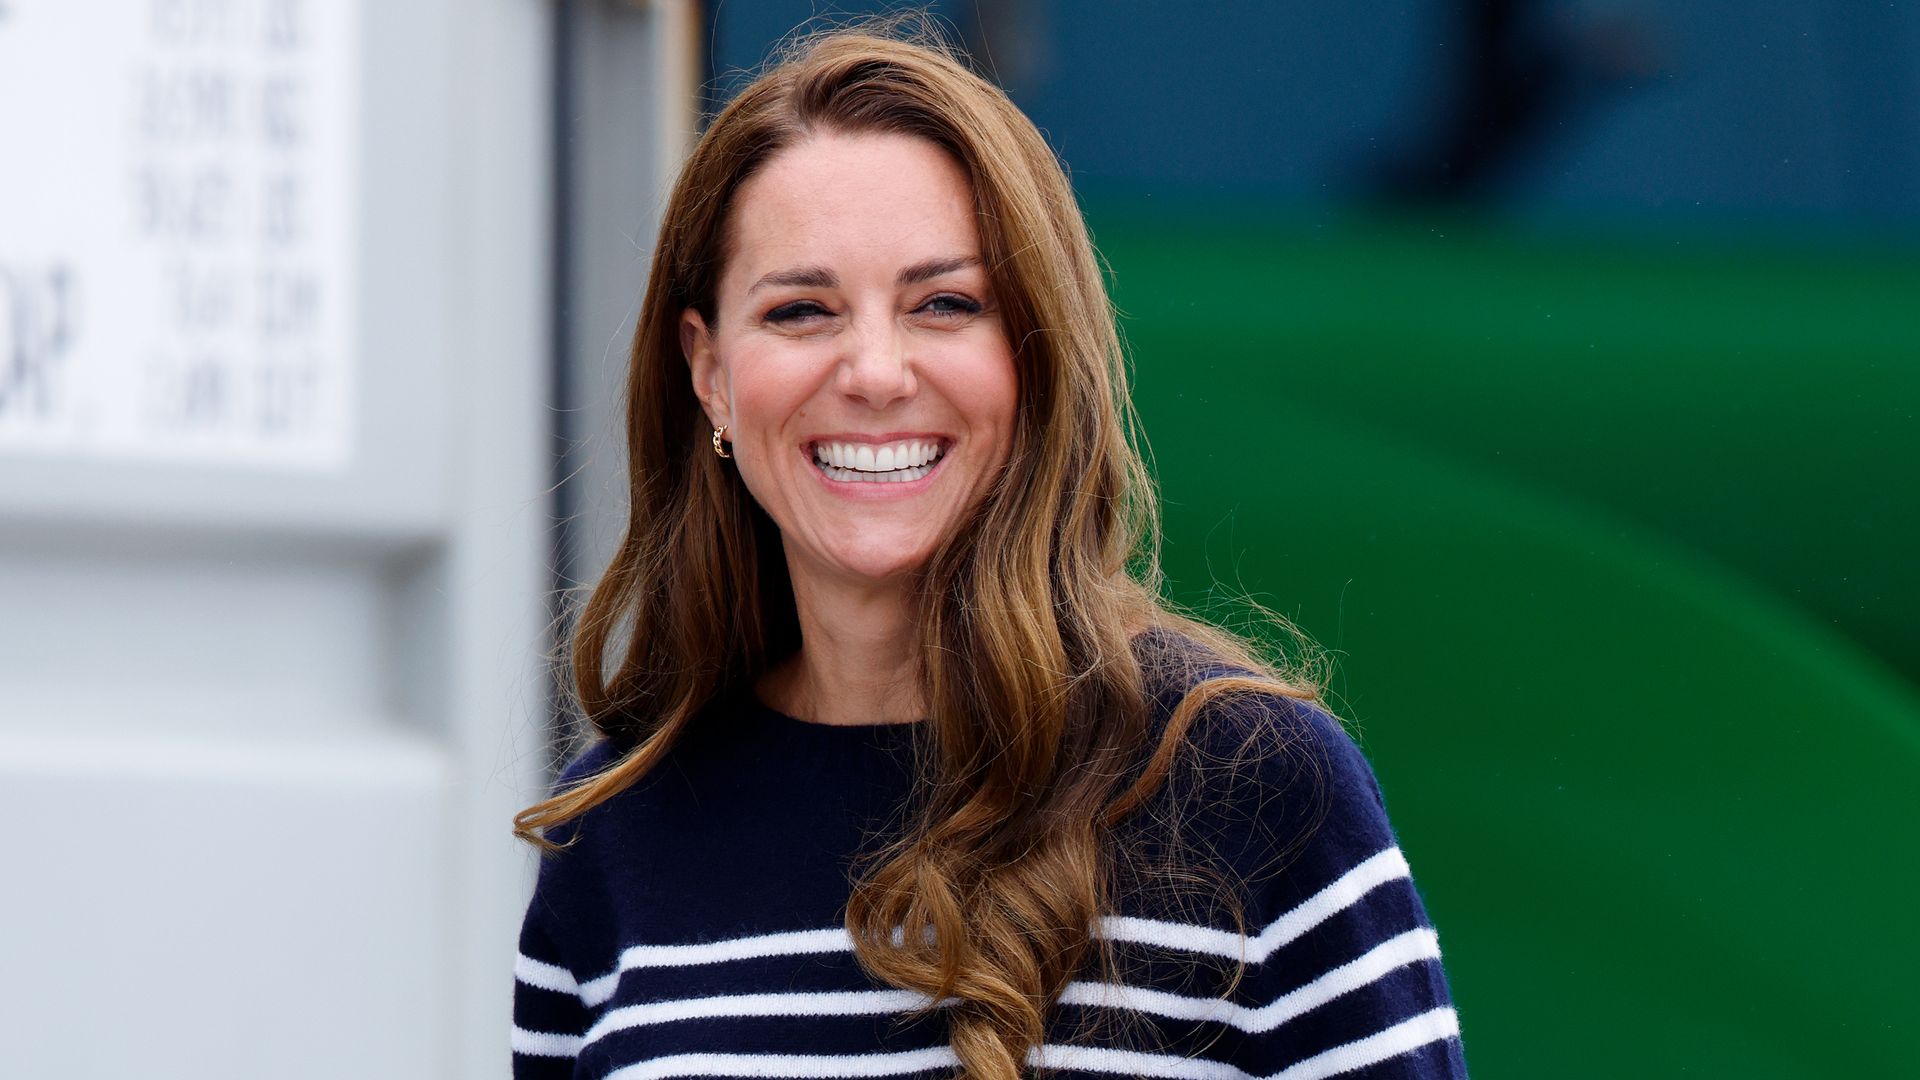 Catherine, Duchess of Cambridge visits the 1851 Trust and the Great Britain SailGP Team on July 31, 2022 in Plymouth, England. During the visit, the Duchess of Cambridge took part in activities educating young people about sustainability. (Photo by Max Mumby/Indigo/Getty Images)